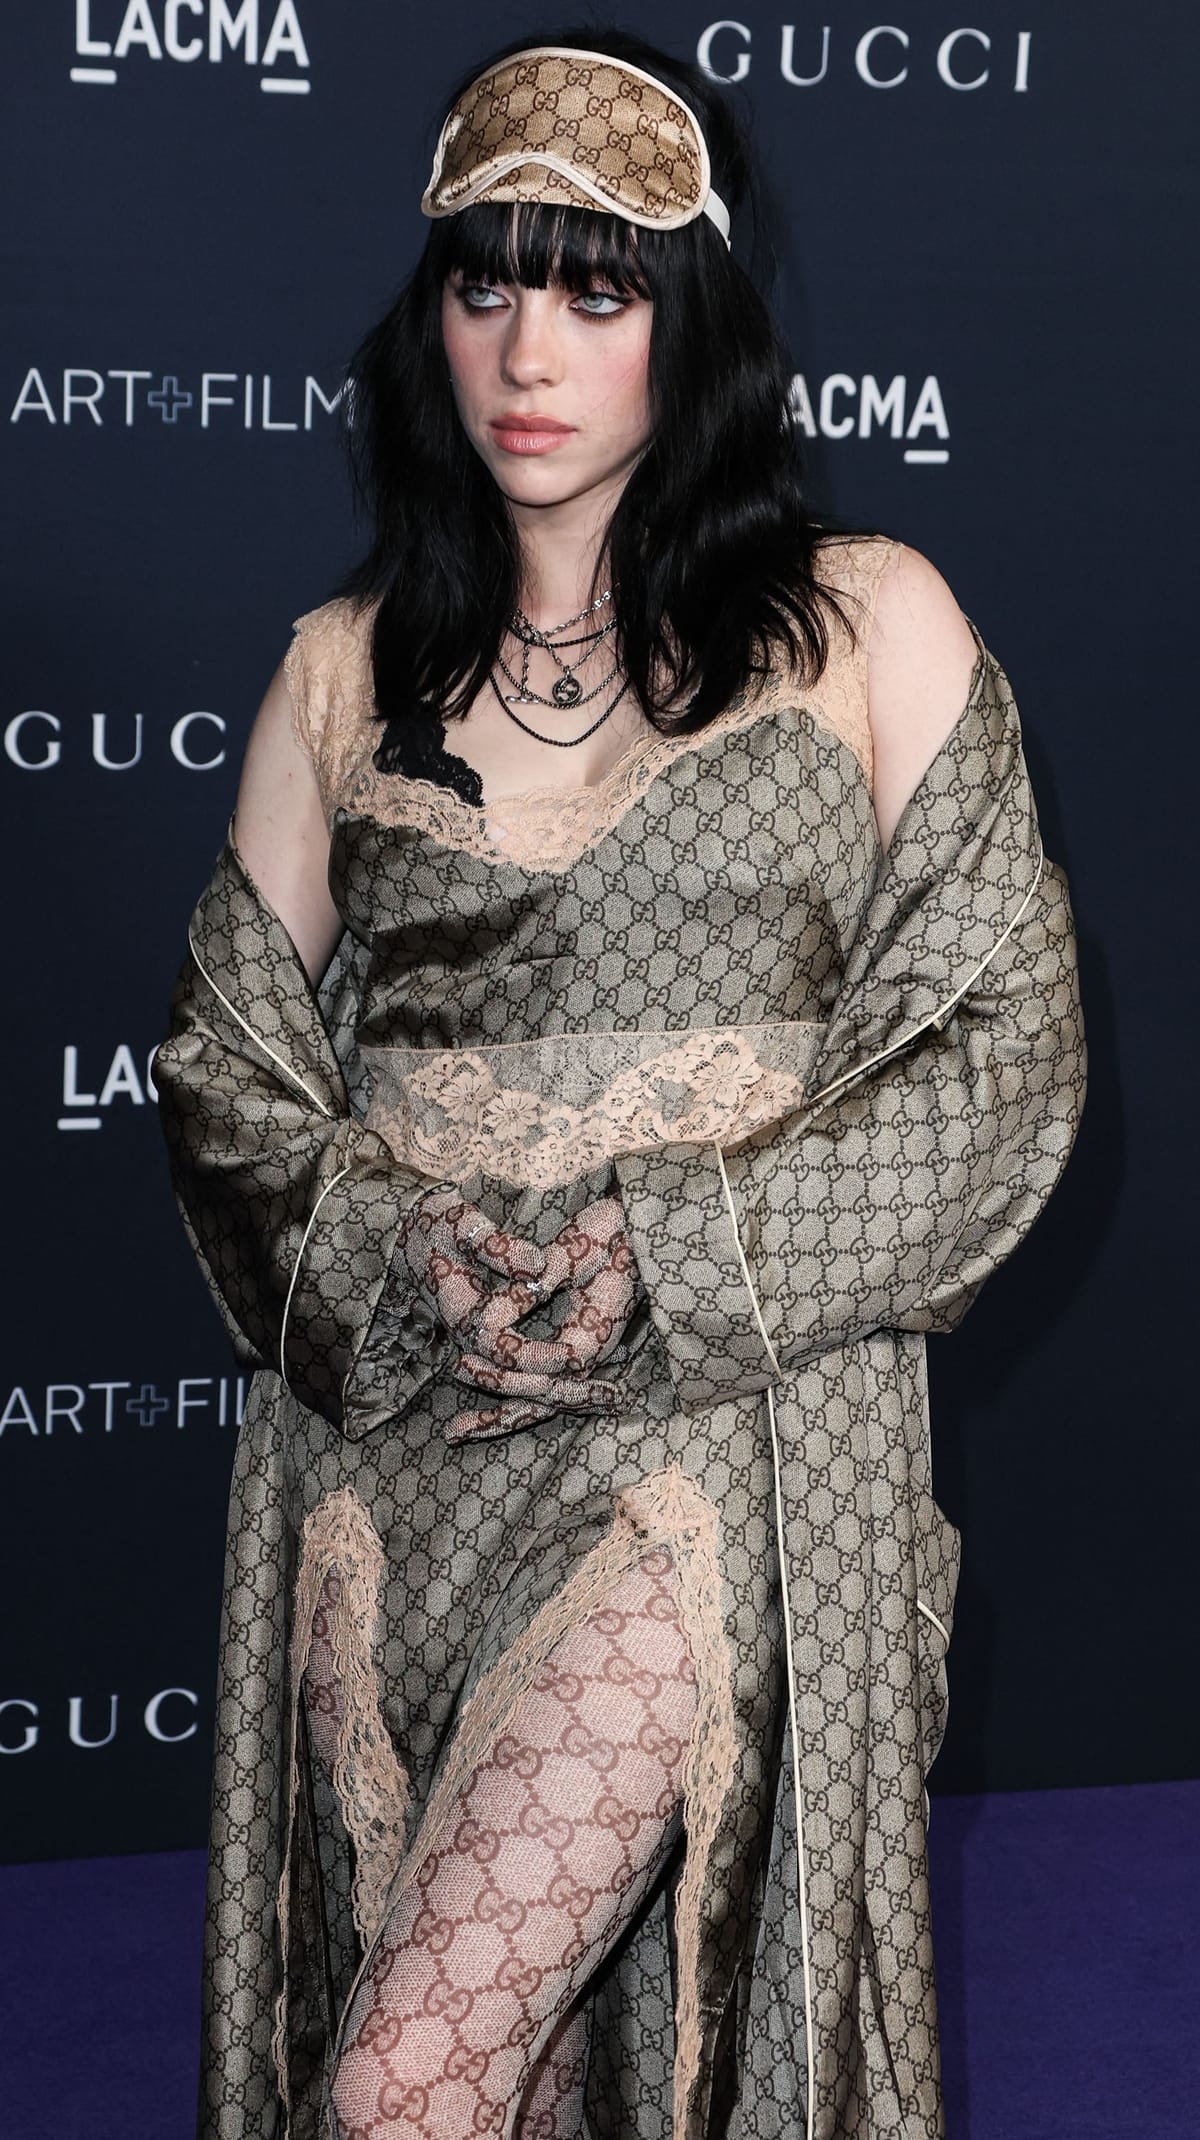 Gucci's iconic GG motif brings instantly recognizable heritage charm to Billie Eilish's patterned tights